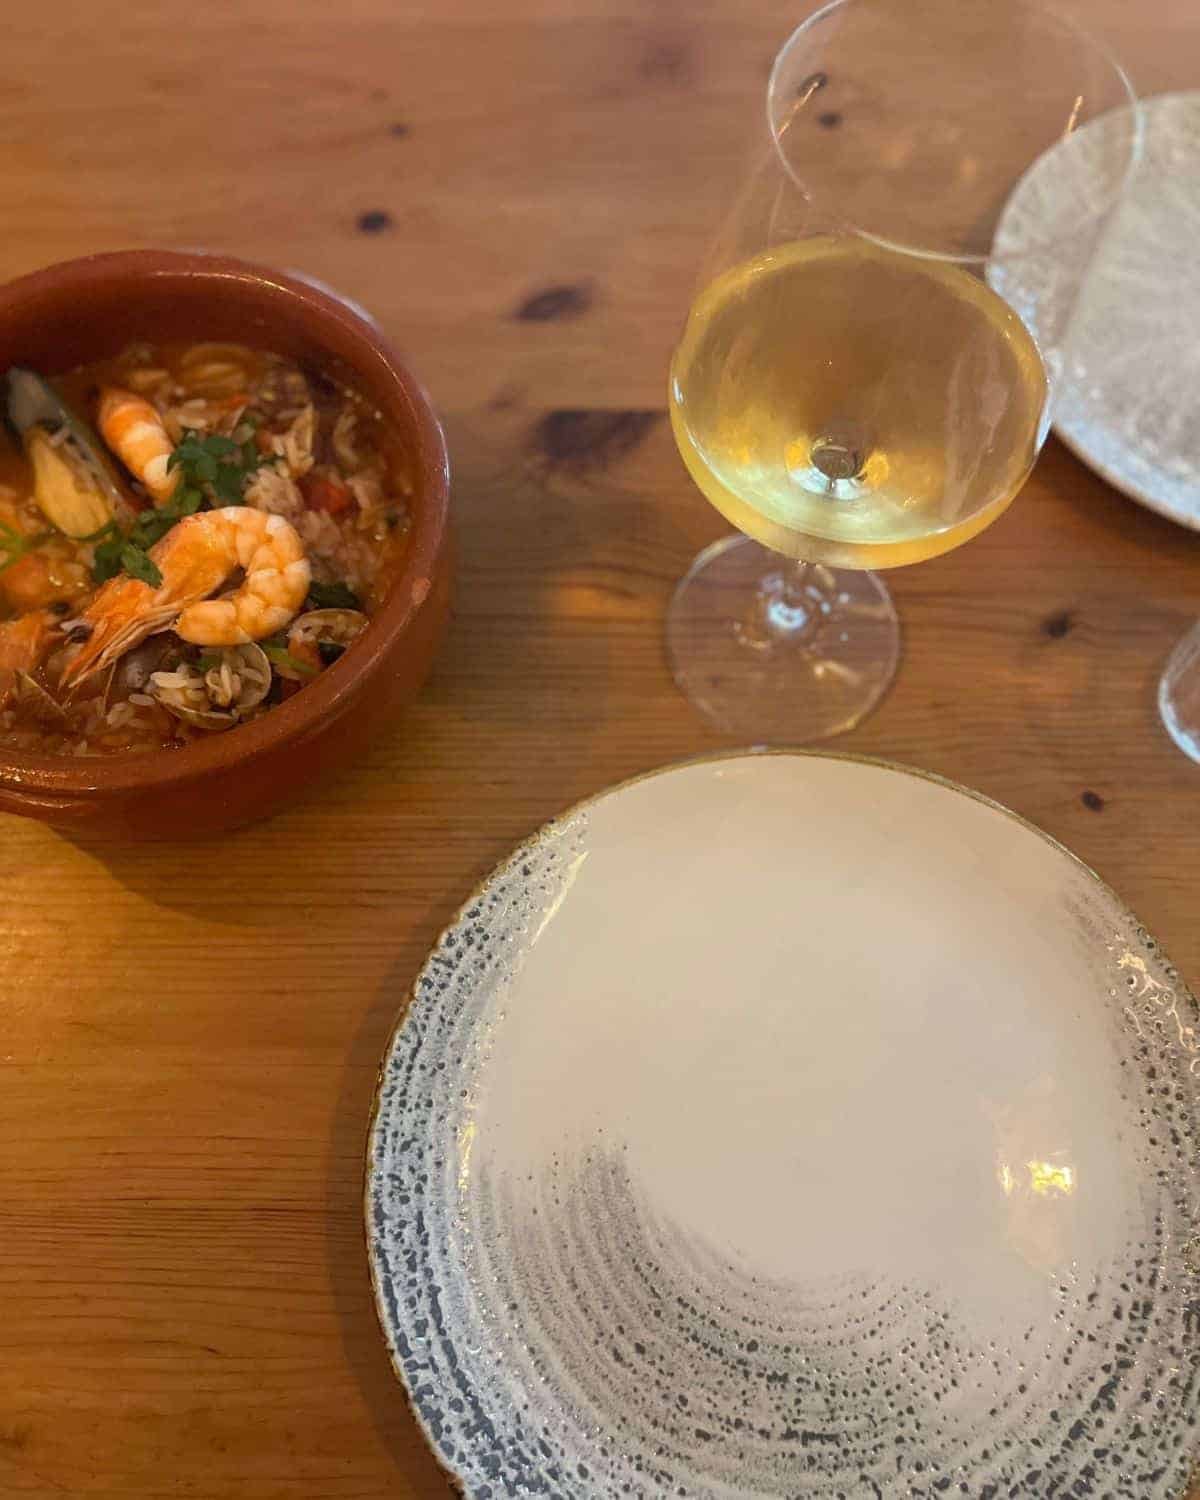 This image showcases a traditional dining setting with a terracotta bowl filled with what seems to be a seafood stew, rich in shrimps and clams, possibly a local delicacy. The bowl is paired with a glass of white wine, and another empty plate waits to be served, suggesting a meal shared.